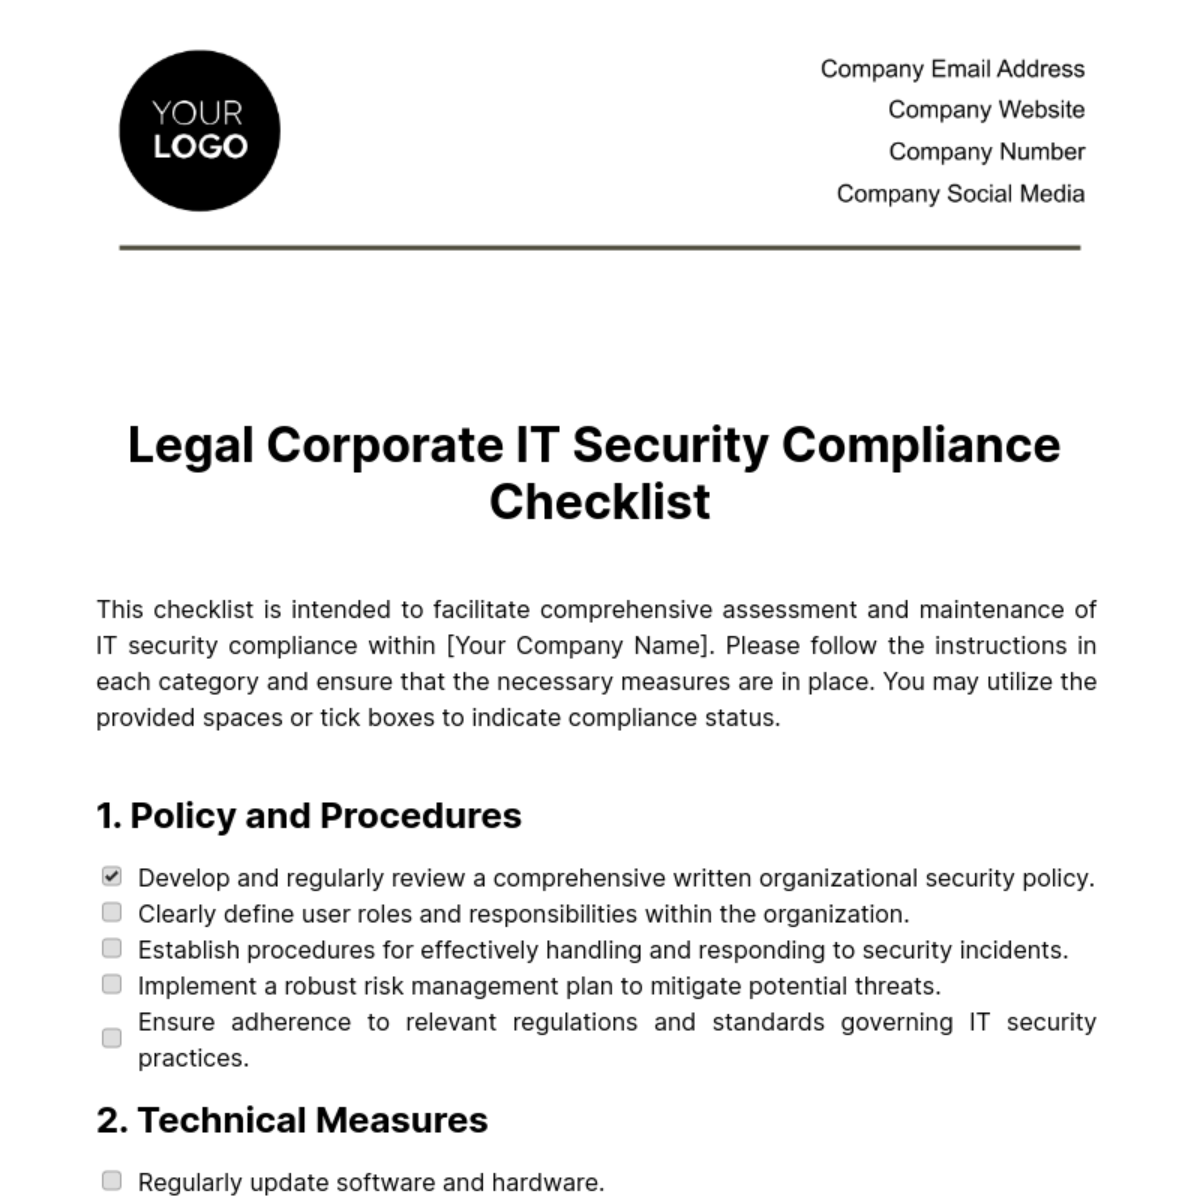 Legal Corporate IT Security Compliance Checklist Template